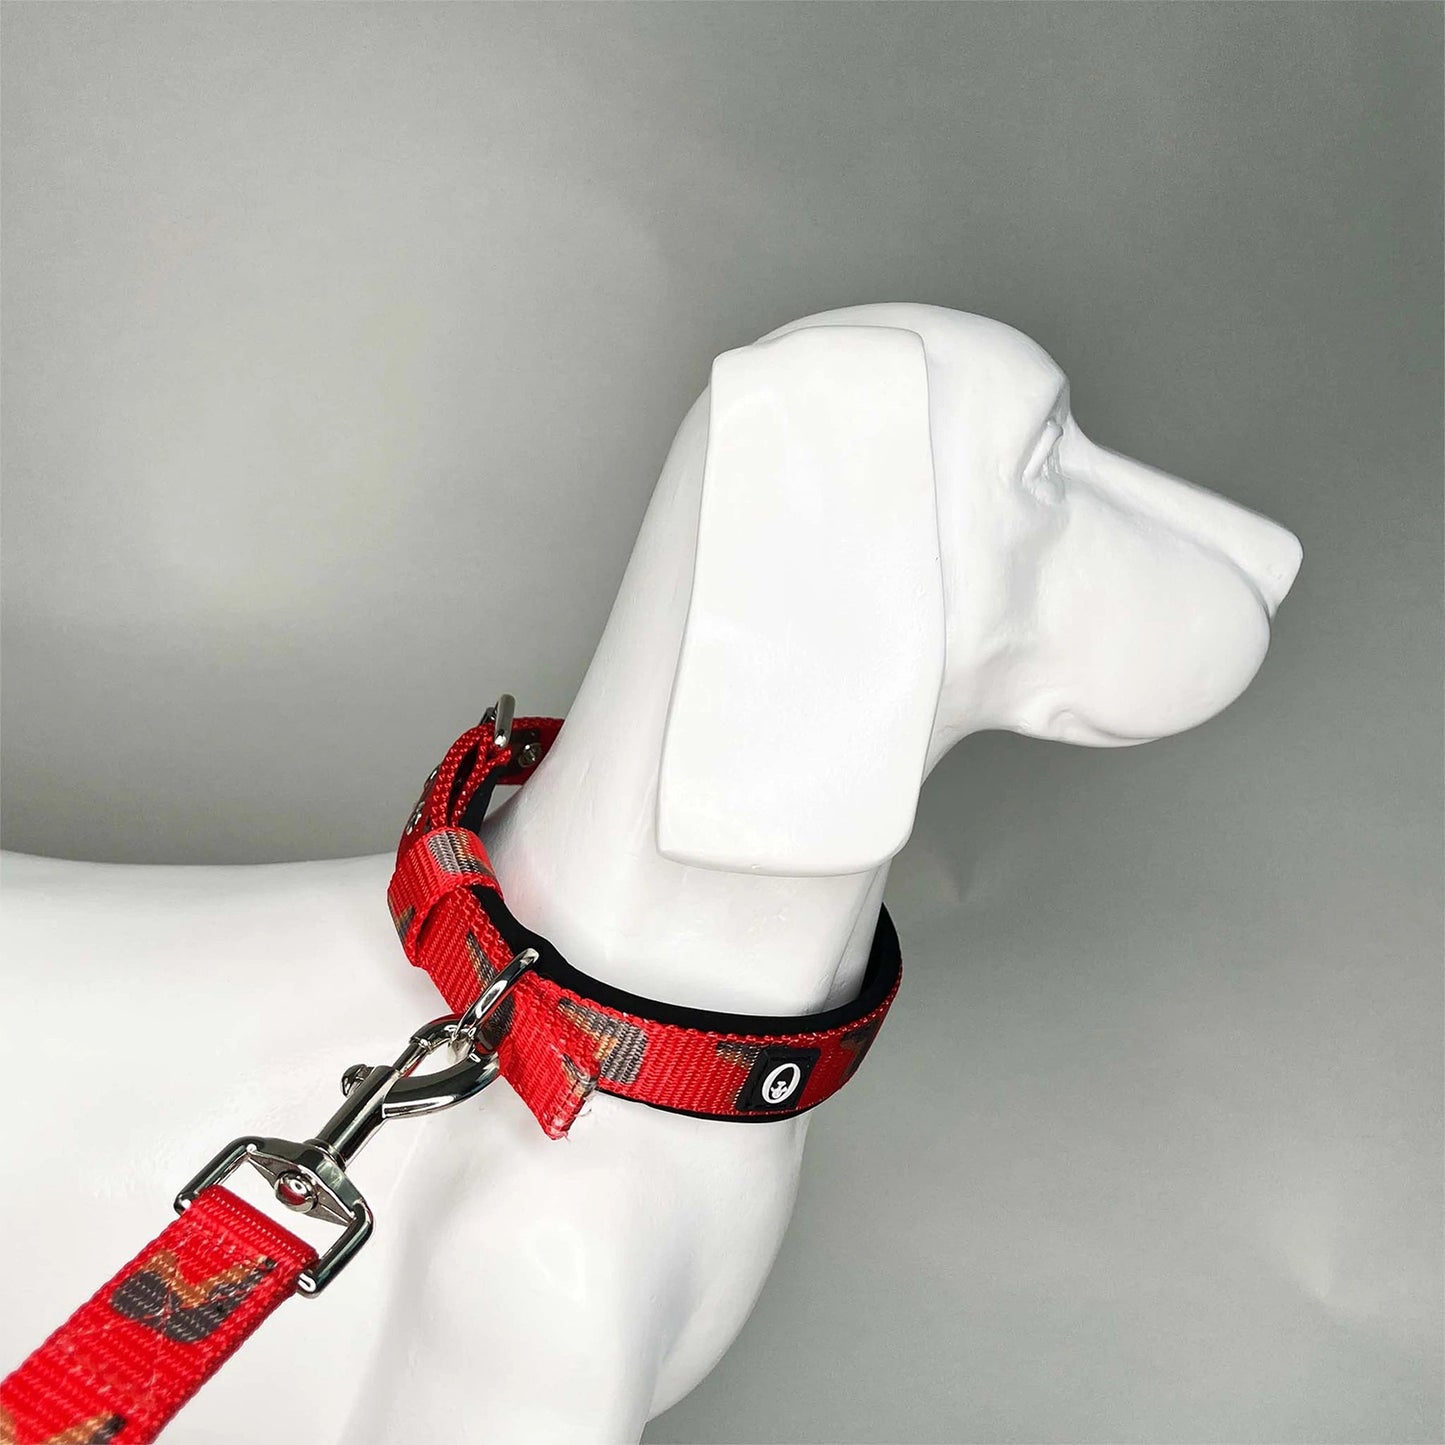 Forfurs - Grumpy Puppy Pin Buckle Collar For Dogs & Cats